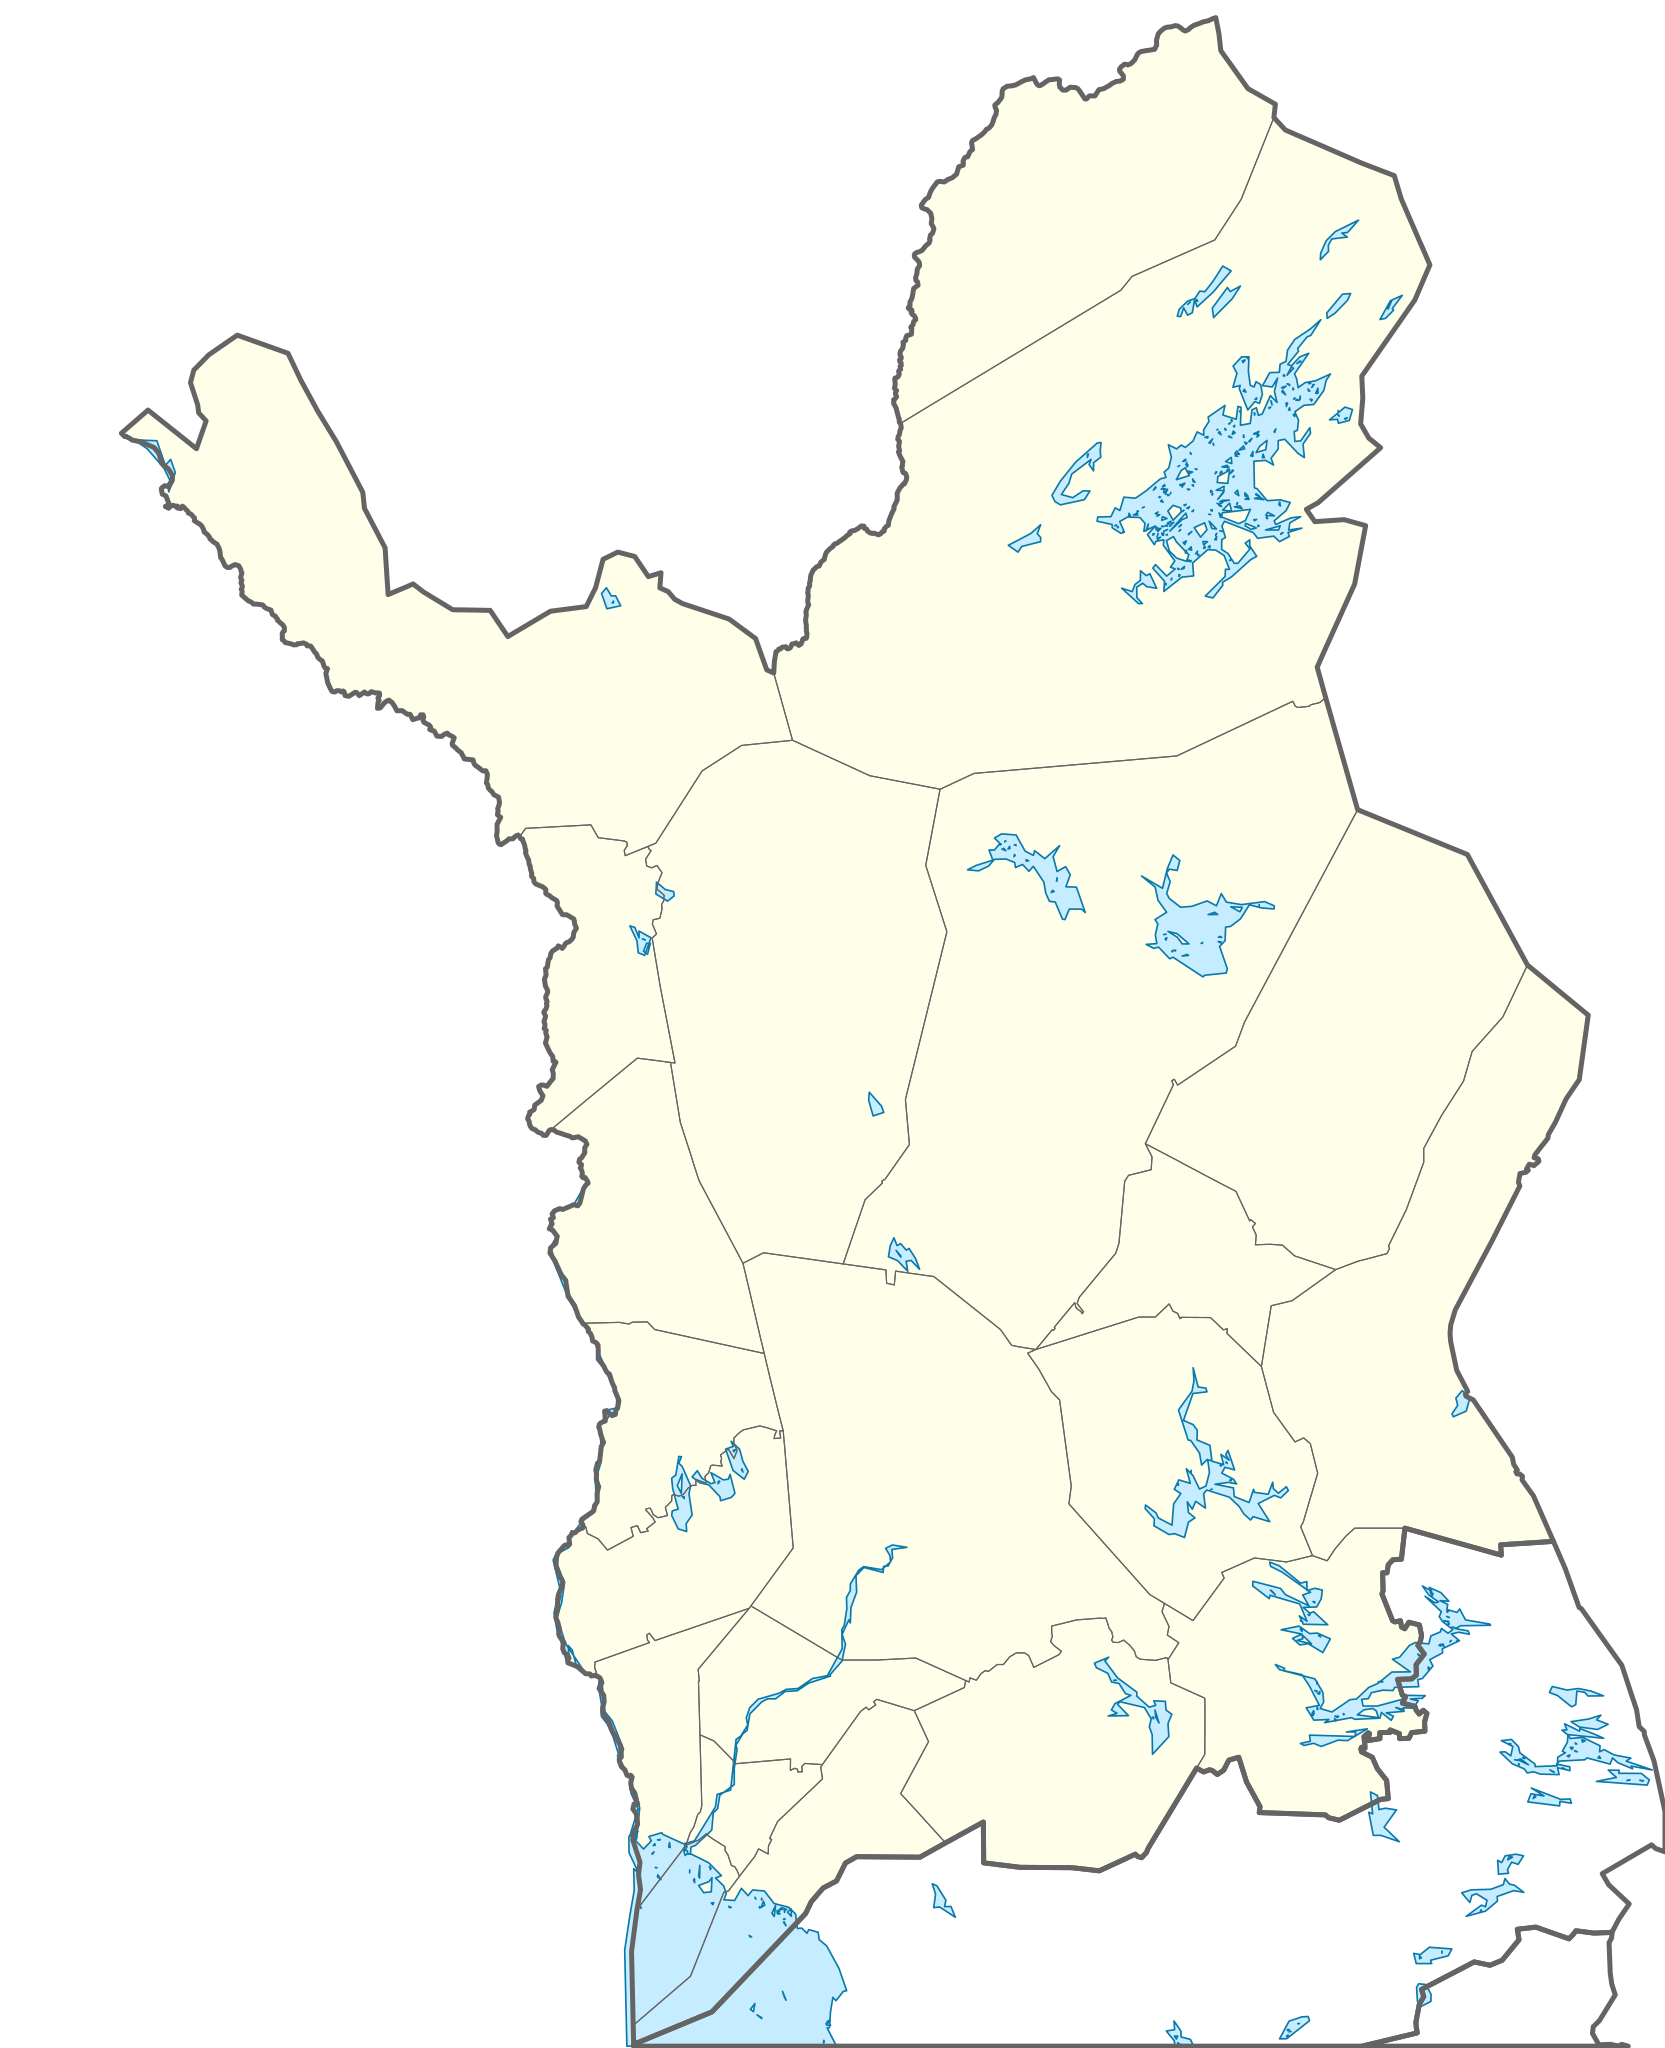 File:Finland Lapland  - Wikimedia Commons